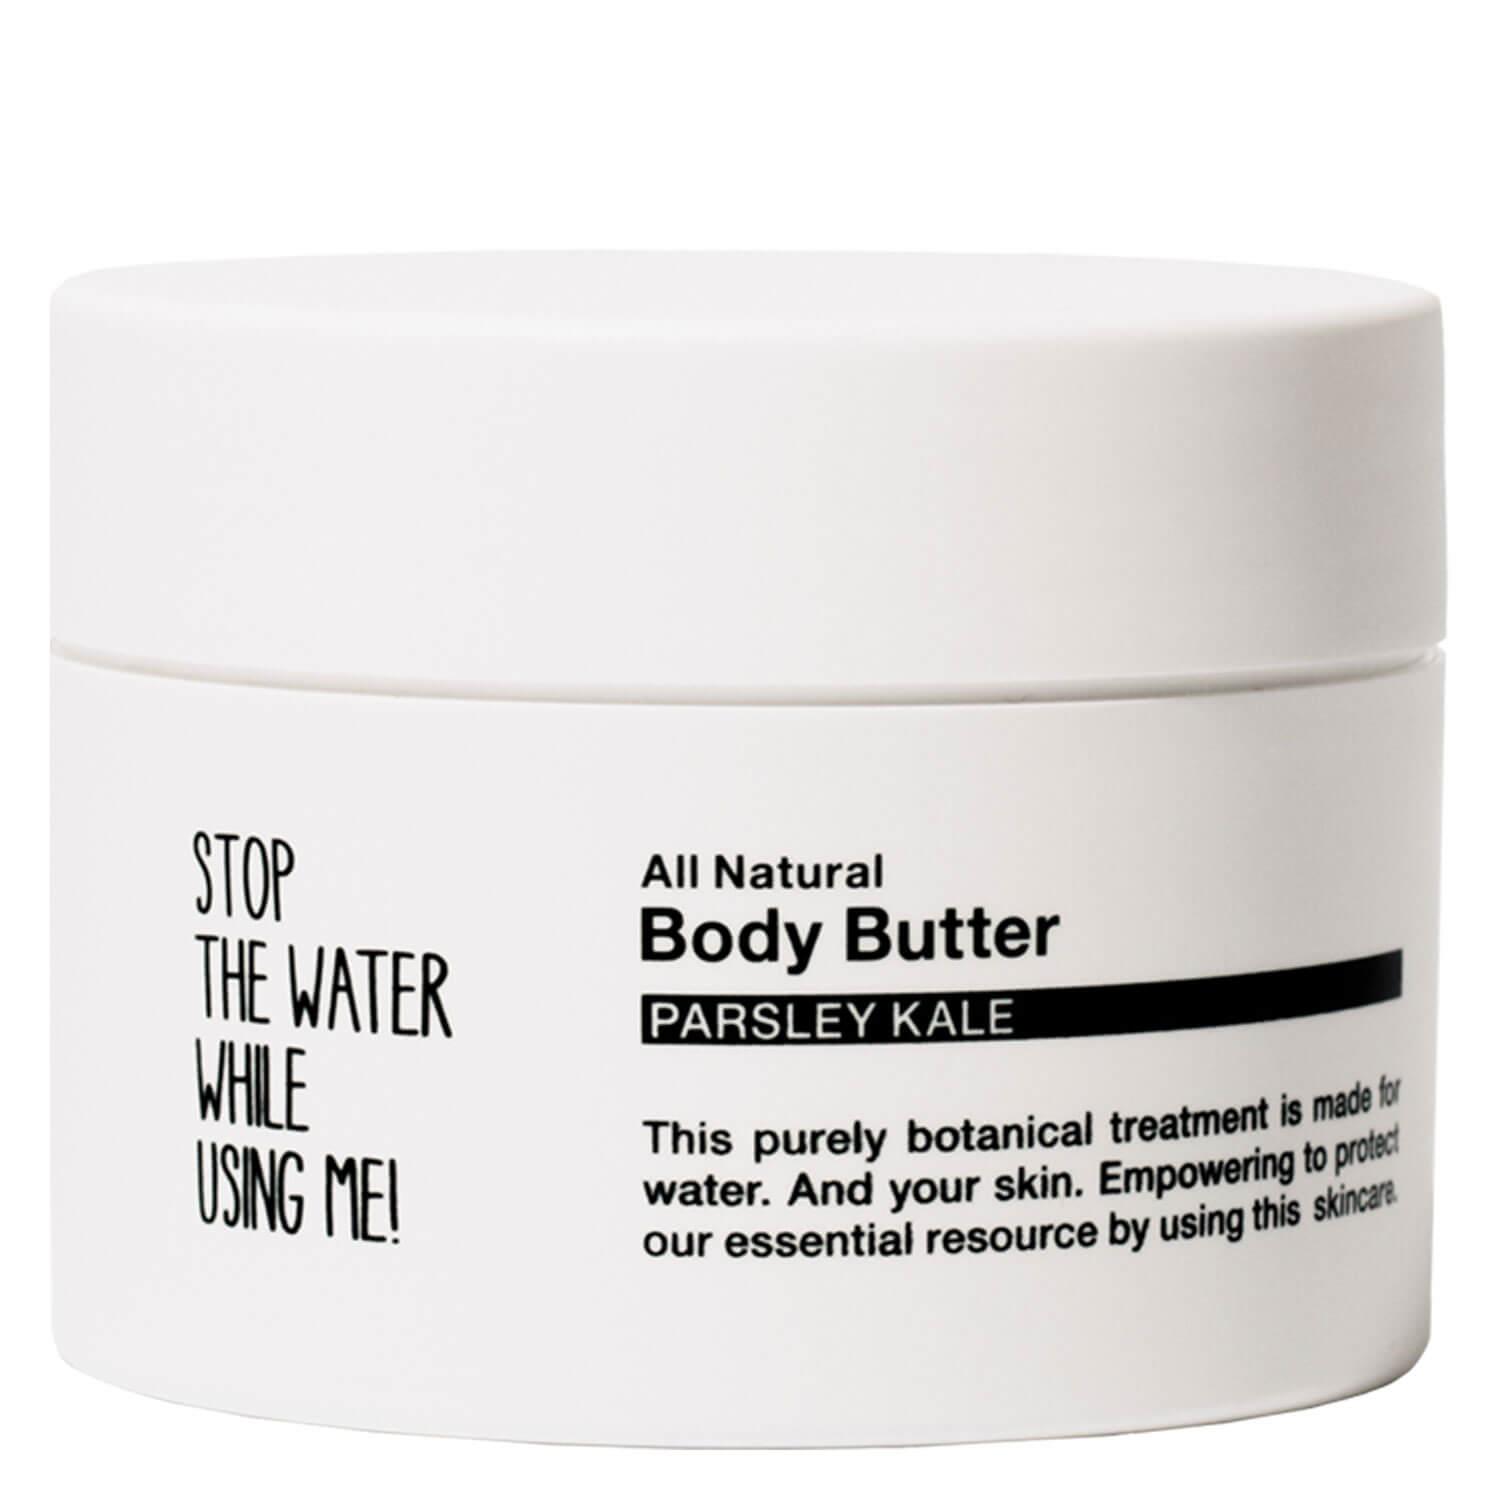 All Natural Body - Body Butter Parsey Kale